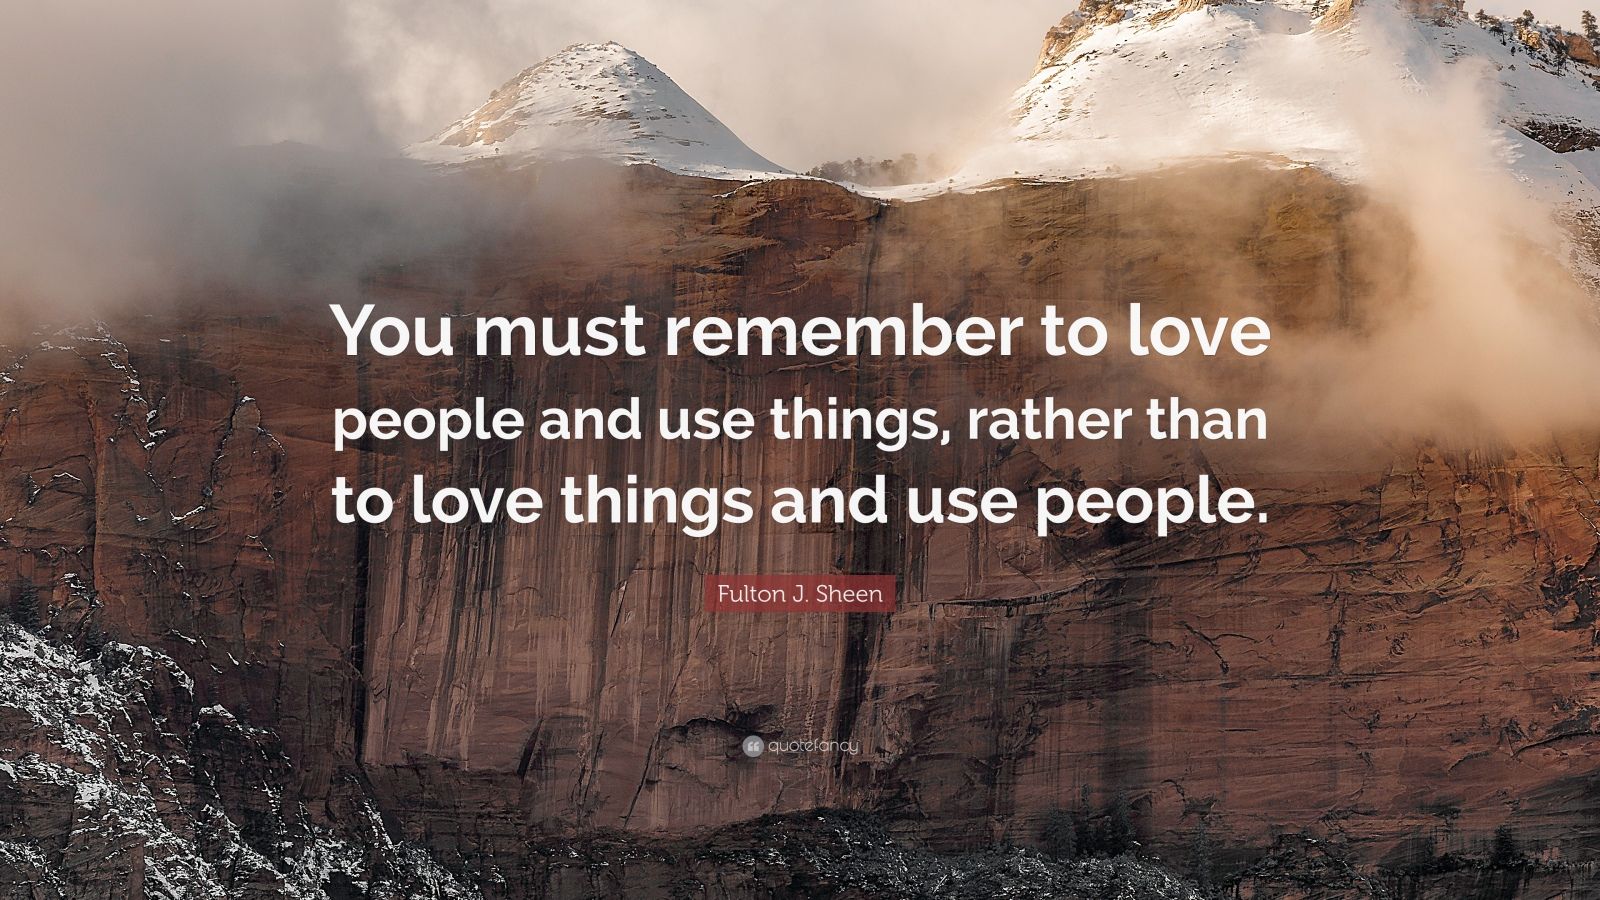 Fulton J. Sheen Quote: “You must remember to love people and use things ...